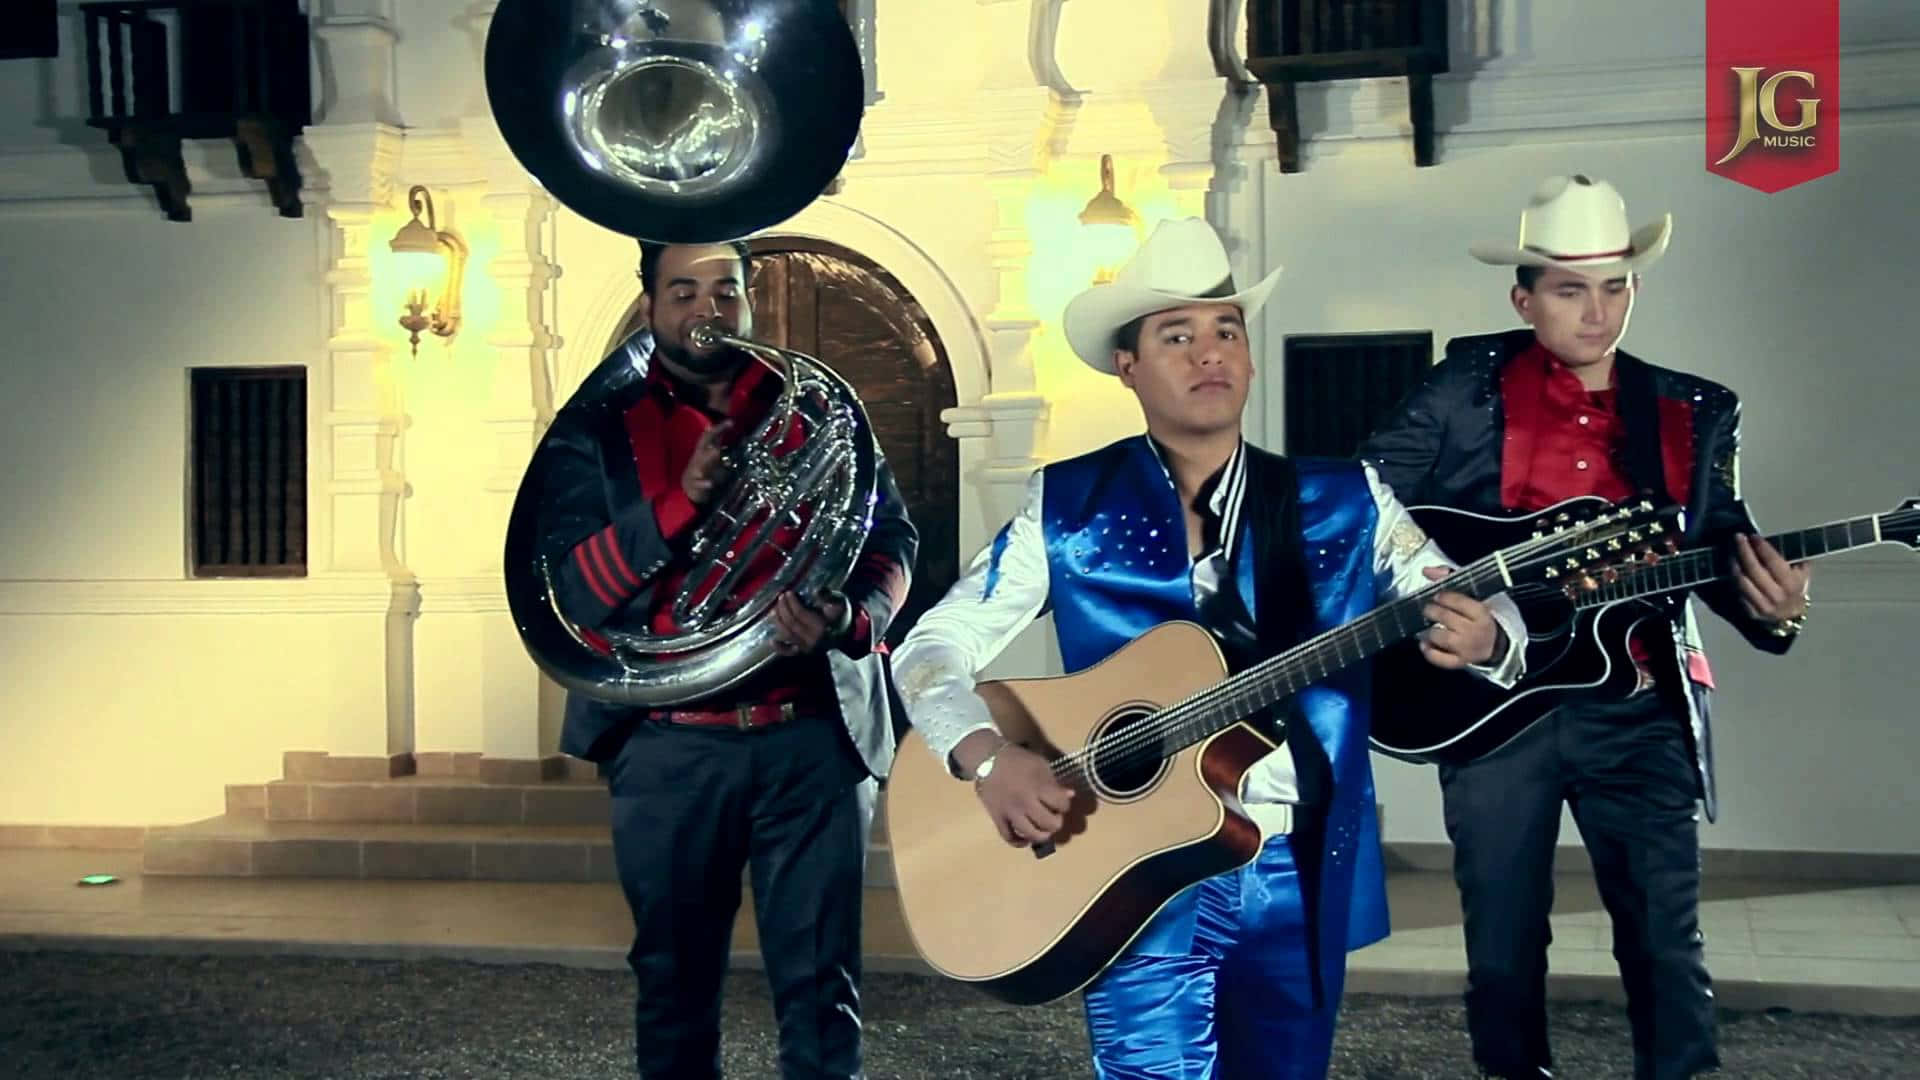 A Group Of Men In Traditional Mexican Attire Playing Instruments Wallpaper